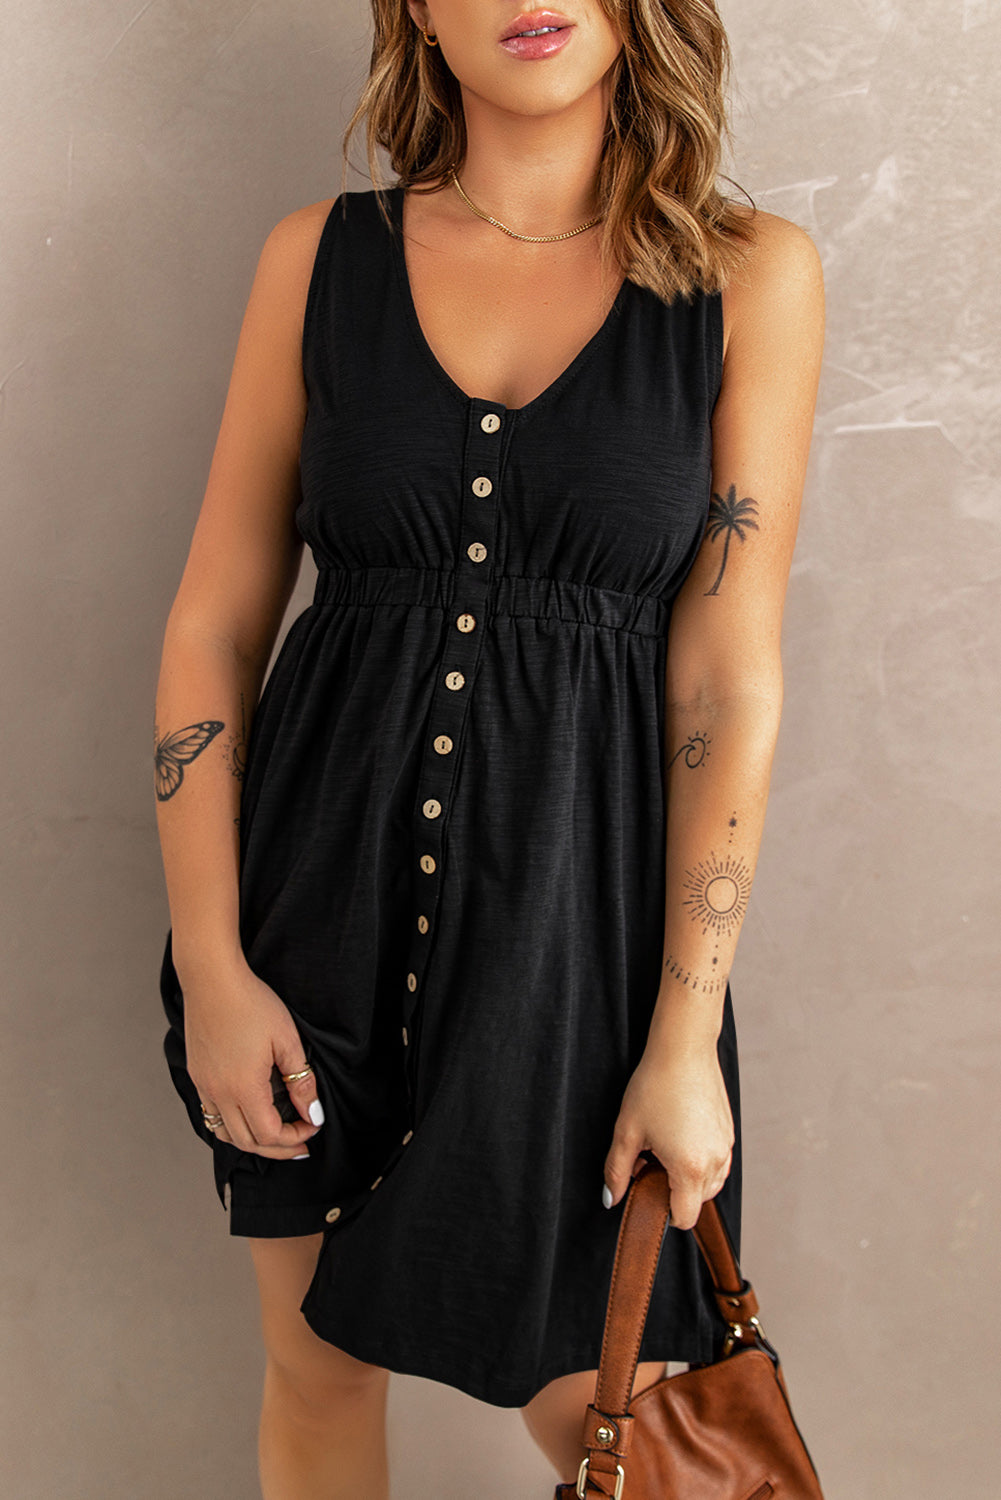 Sleeveless Button Down Mini Dress ( Available In Multiple Colors)- Full Size Run